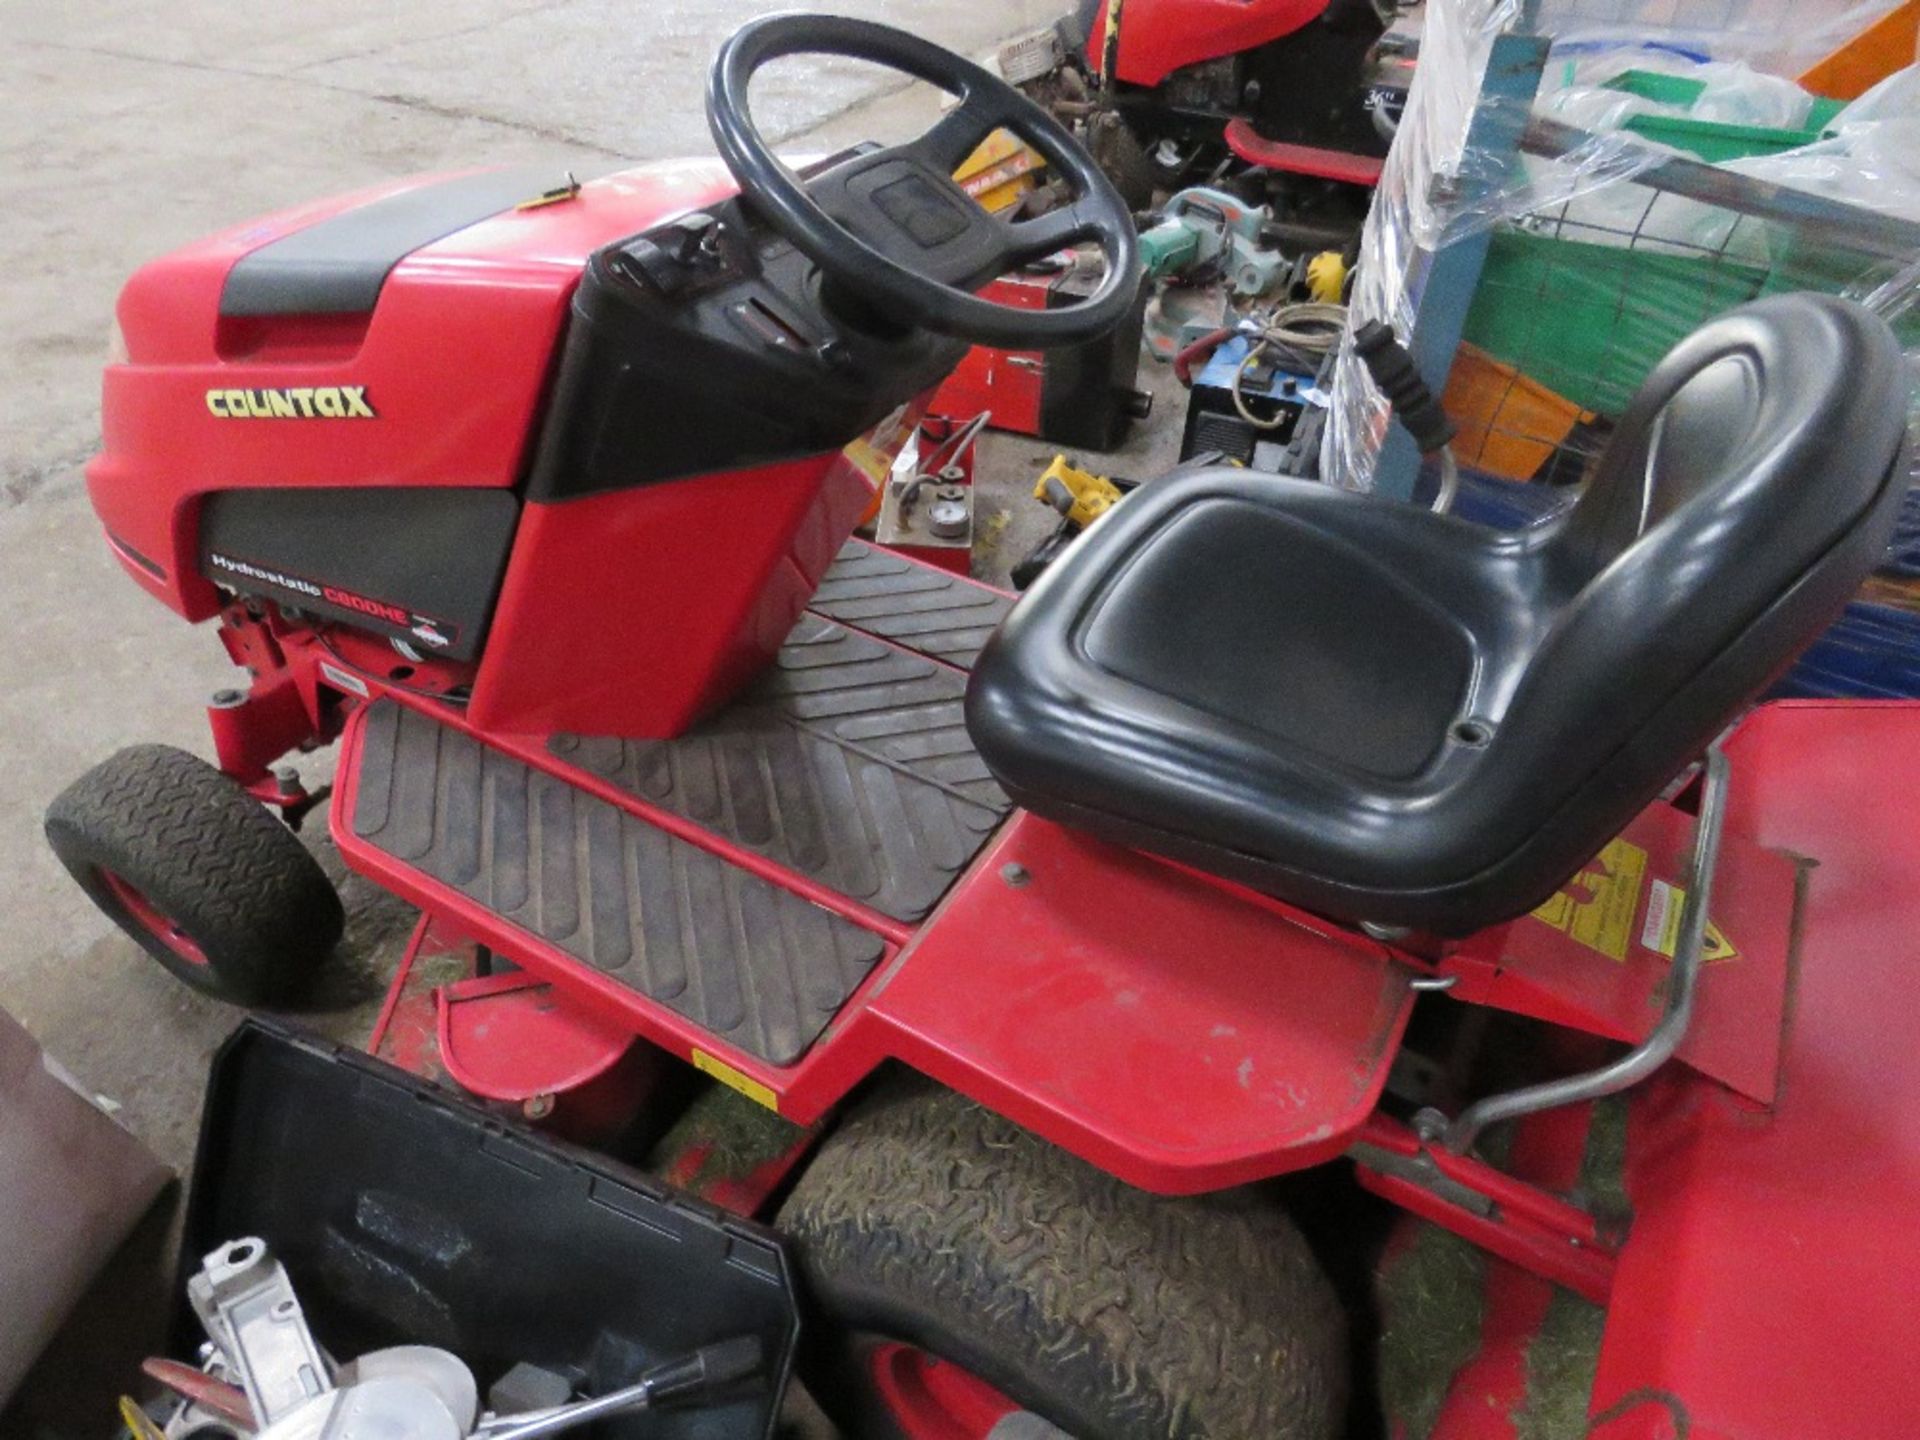 COUNTAX C800HE RIDE ON MOWER C/W COLLECTOR WHEN TESTED WAS SEEN TO RUN AND DRIVE AND MOWER TURNED - Image 8 of 8